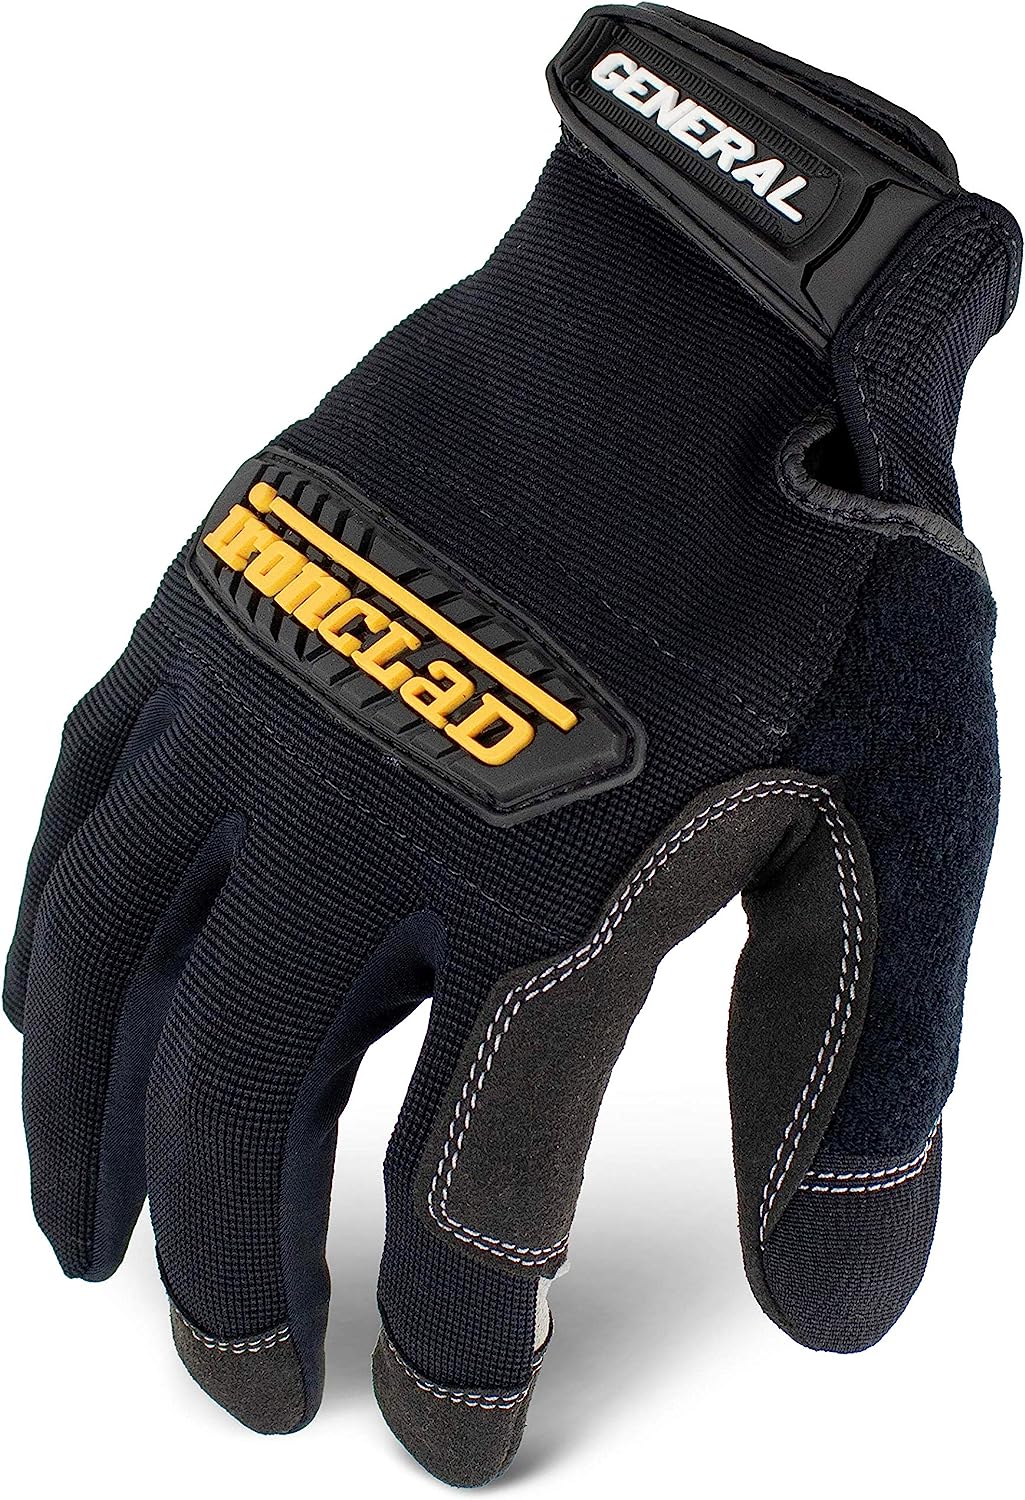 Ironclad General Utility Work Gloves GUG, All-Purpose, [...]